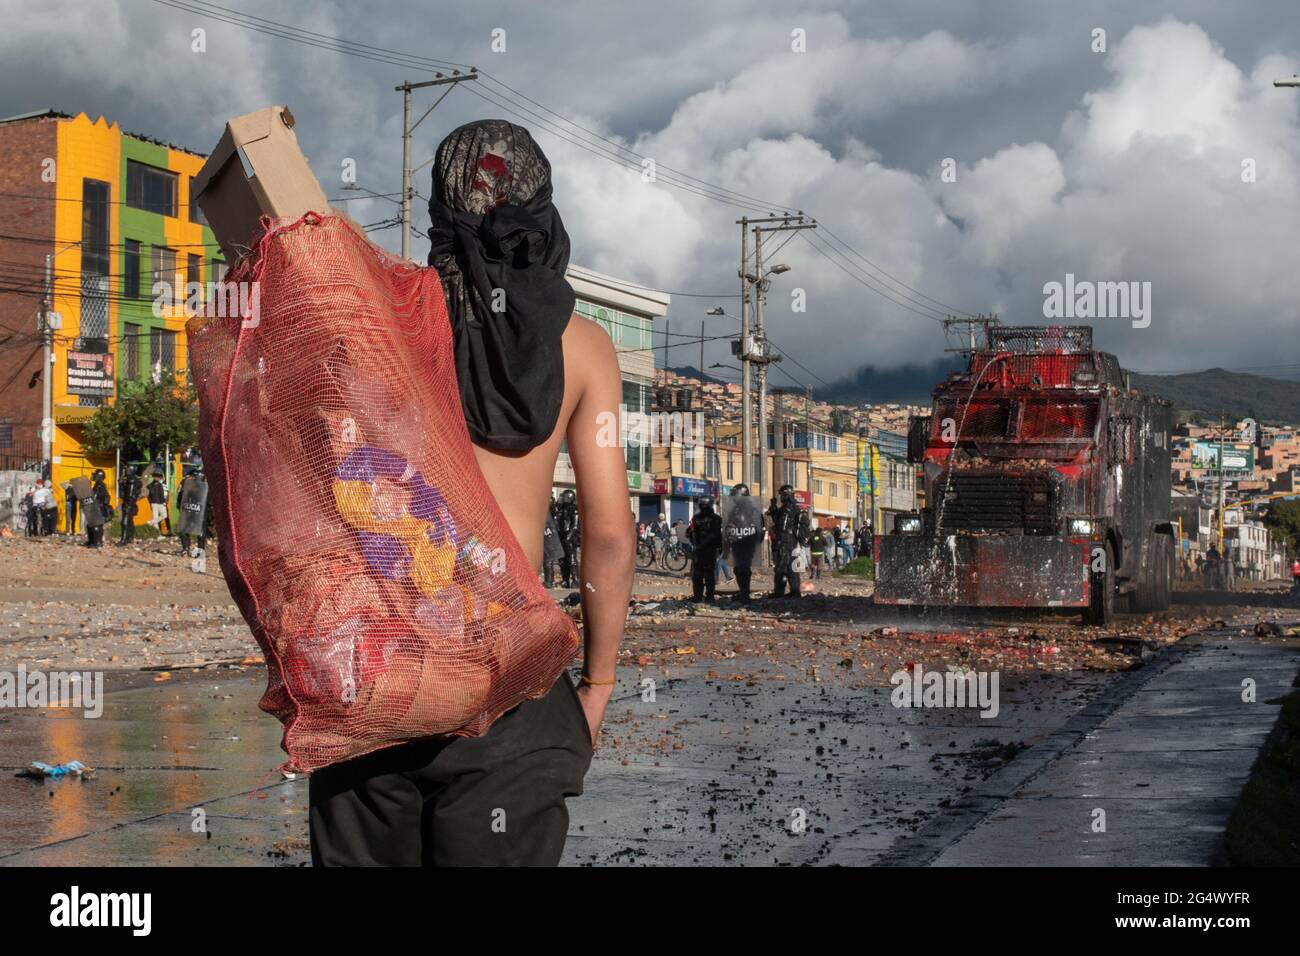 Bogota, Colombia. 21st June, 2021. A demonstrator carries debree in a rag as clashes between demonstratros and Colombia's riot police erupt anti-government protest raise in Bogota Colombia against the government of president Ivan Duque, inequalities and abuse of authority by police. Credit: Long Visual Press/Alamy Live News Stock Photo